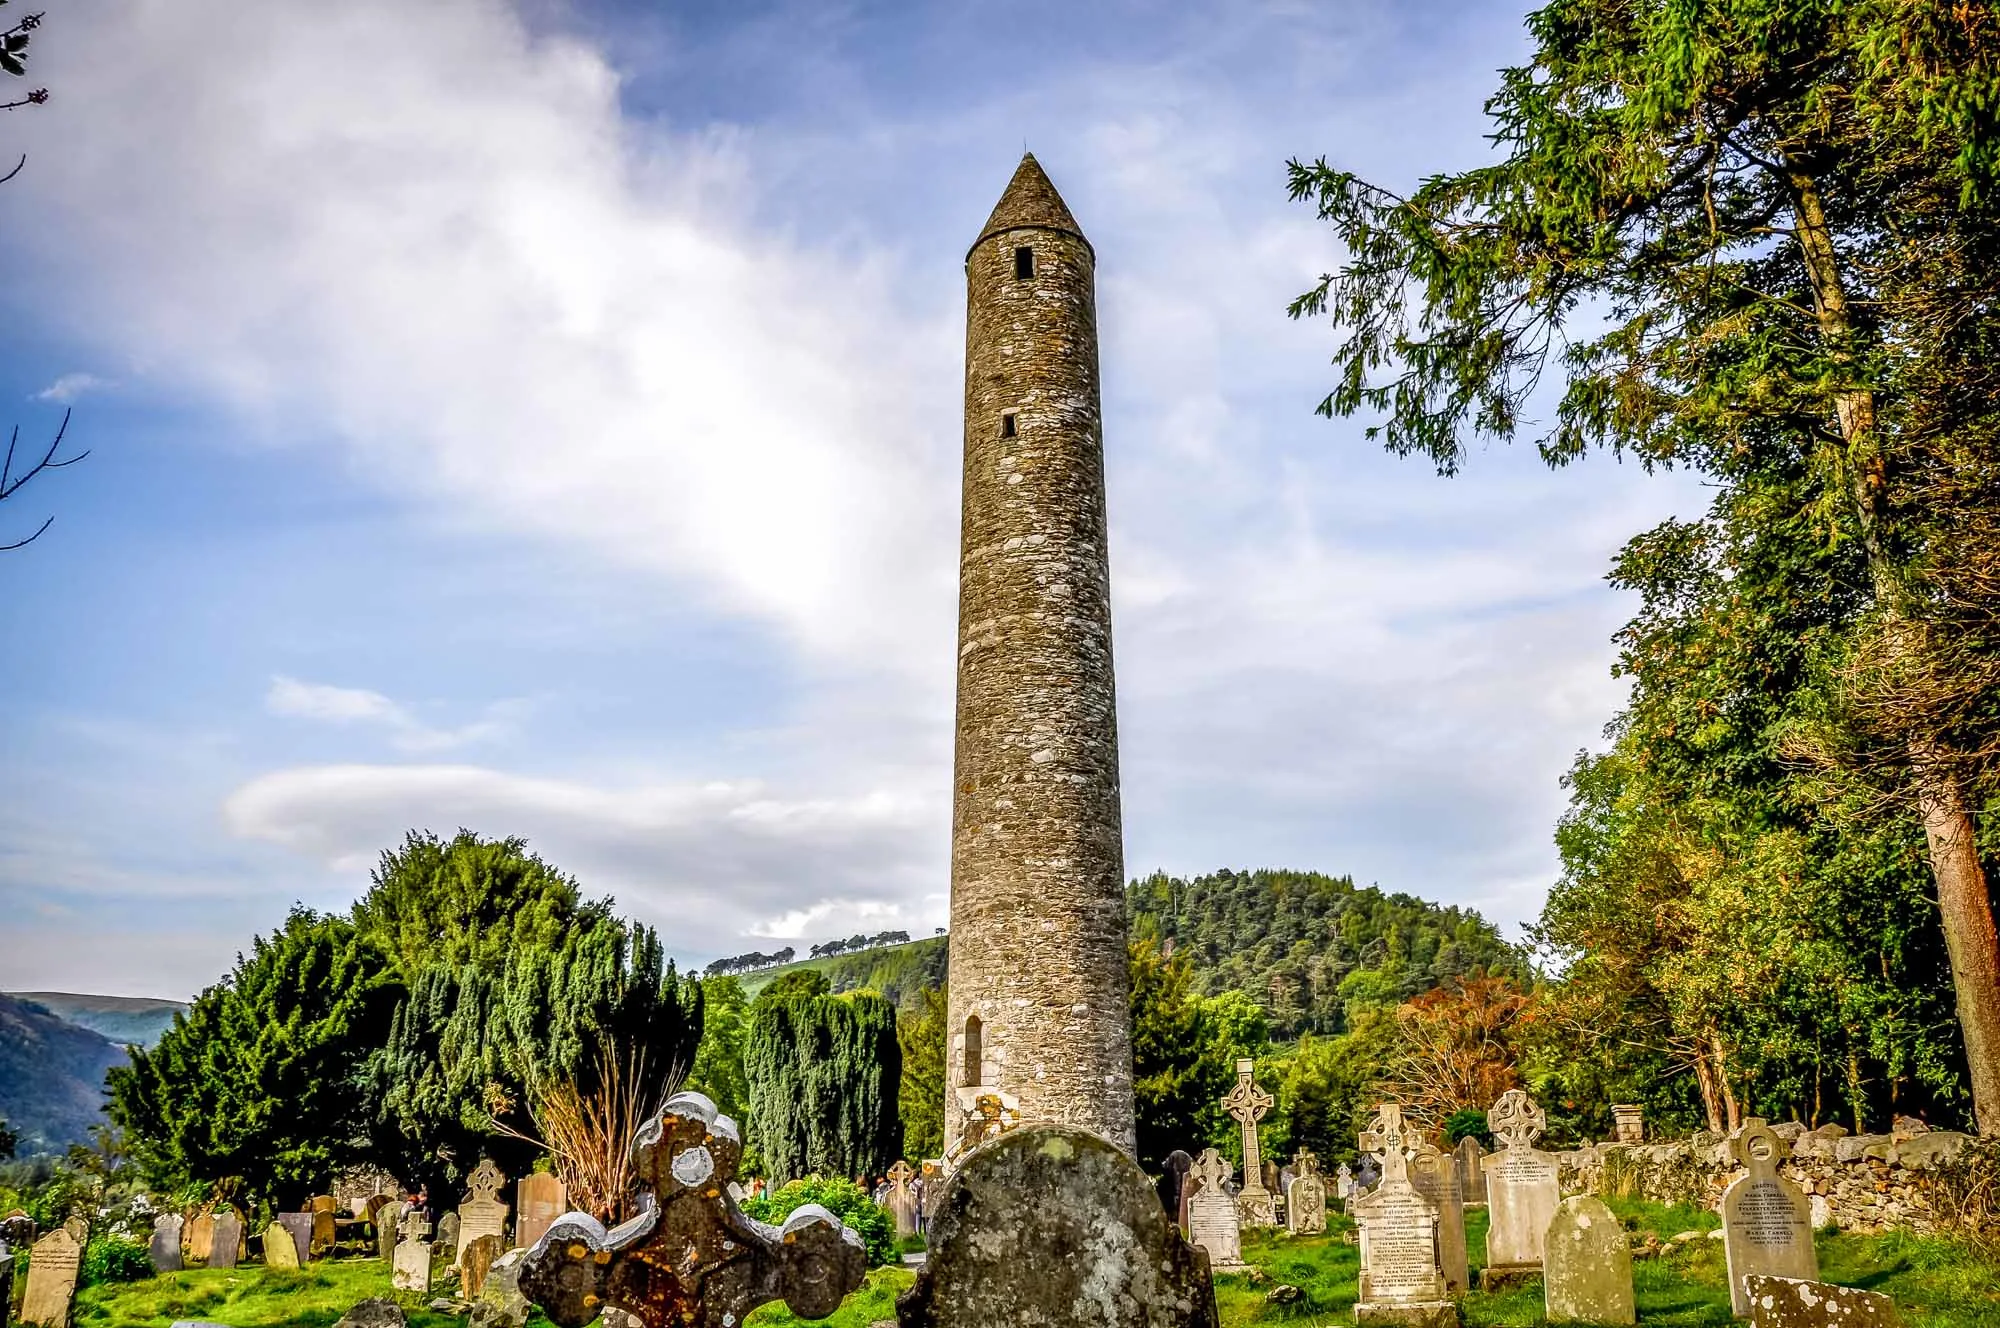 Tall, thin stone tower in an old cemetery set among trees and mountains